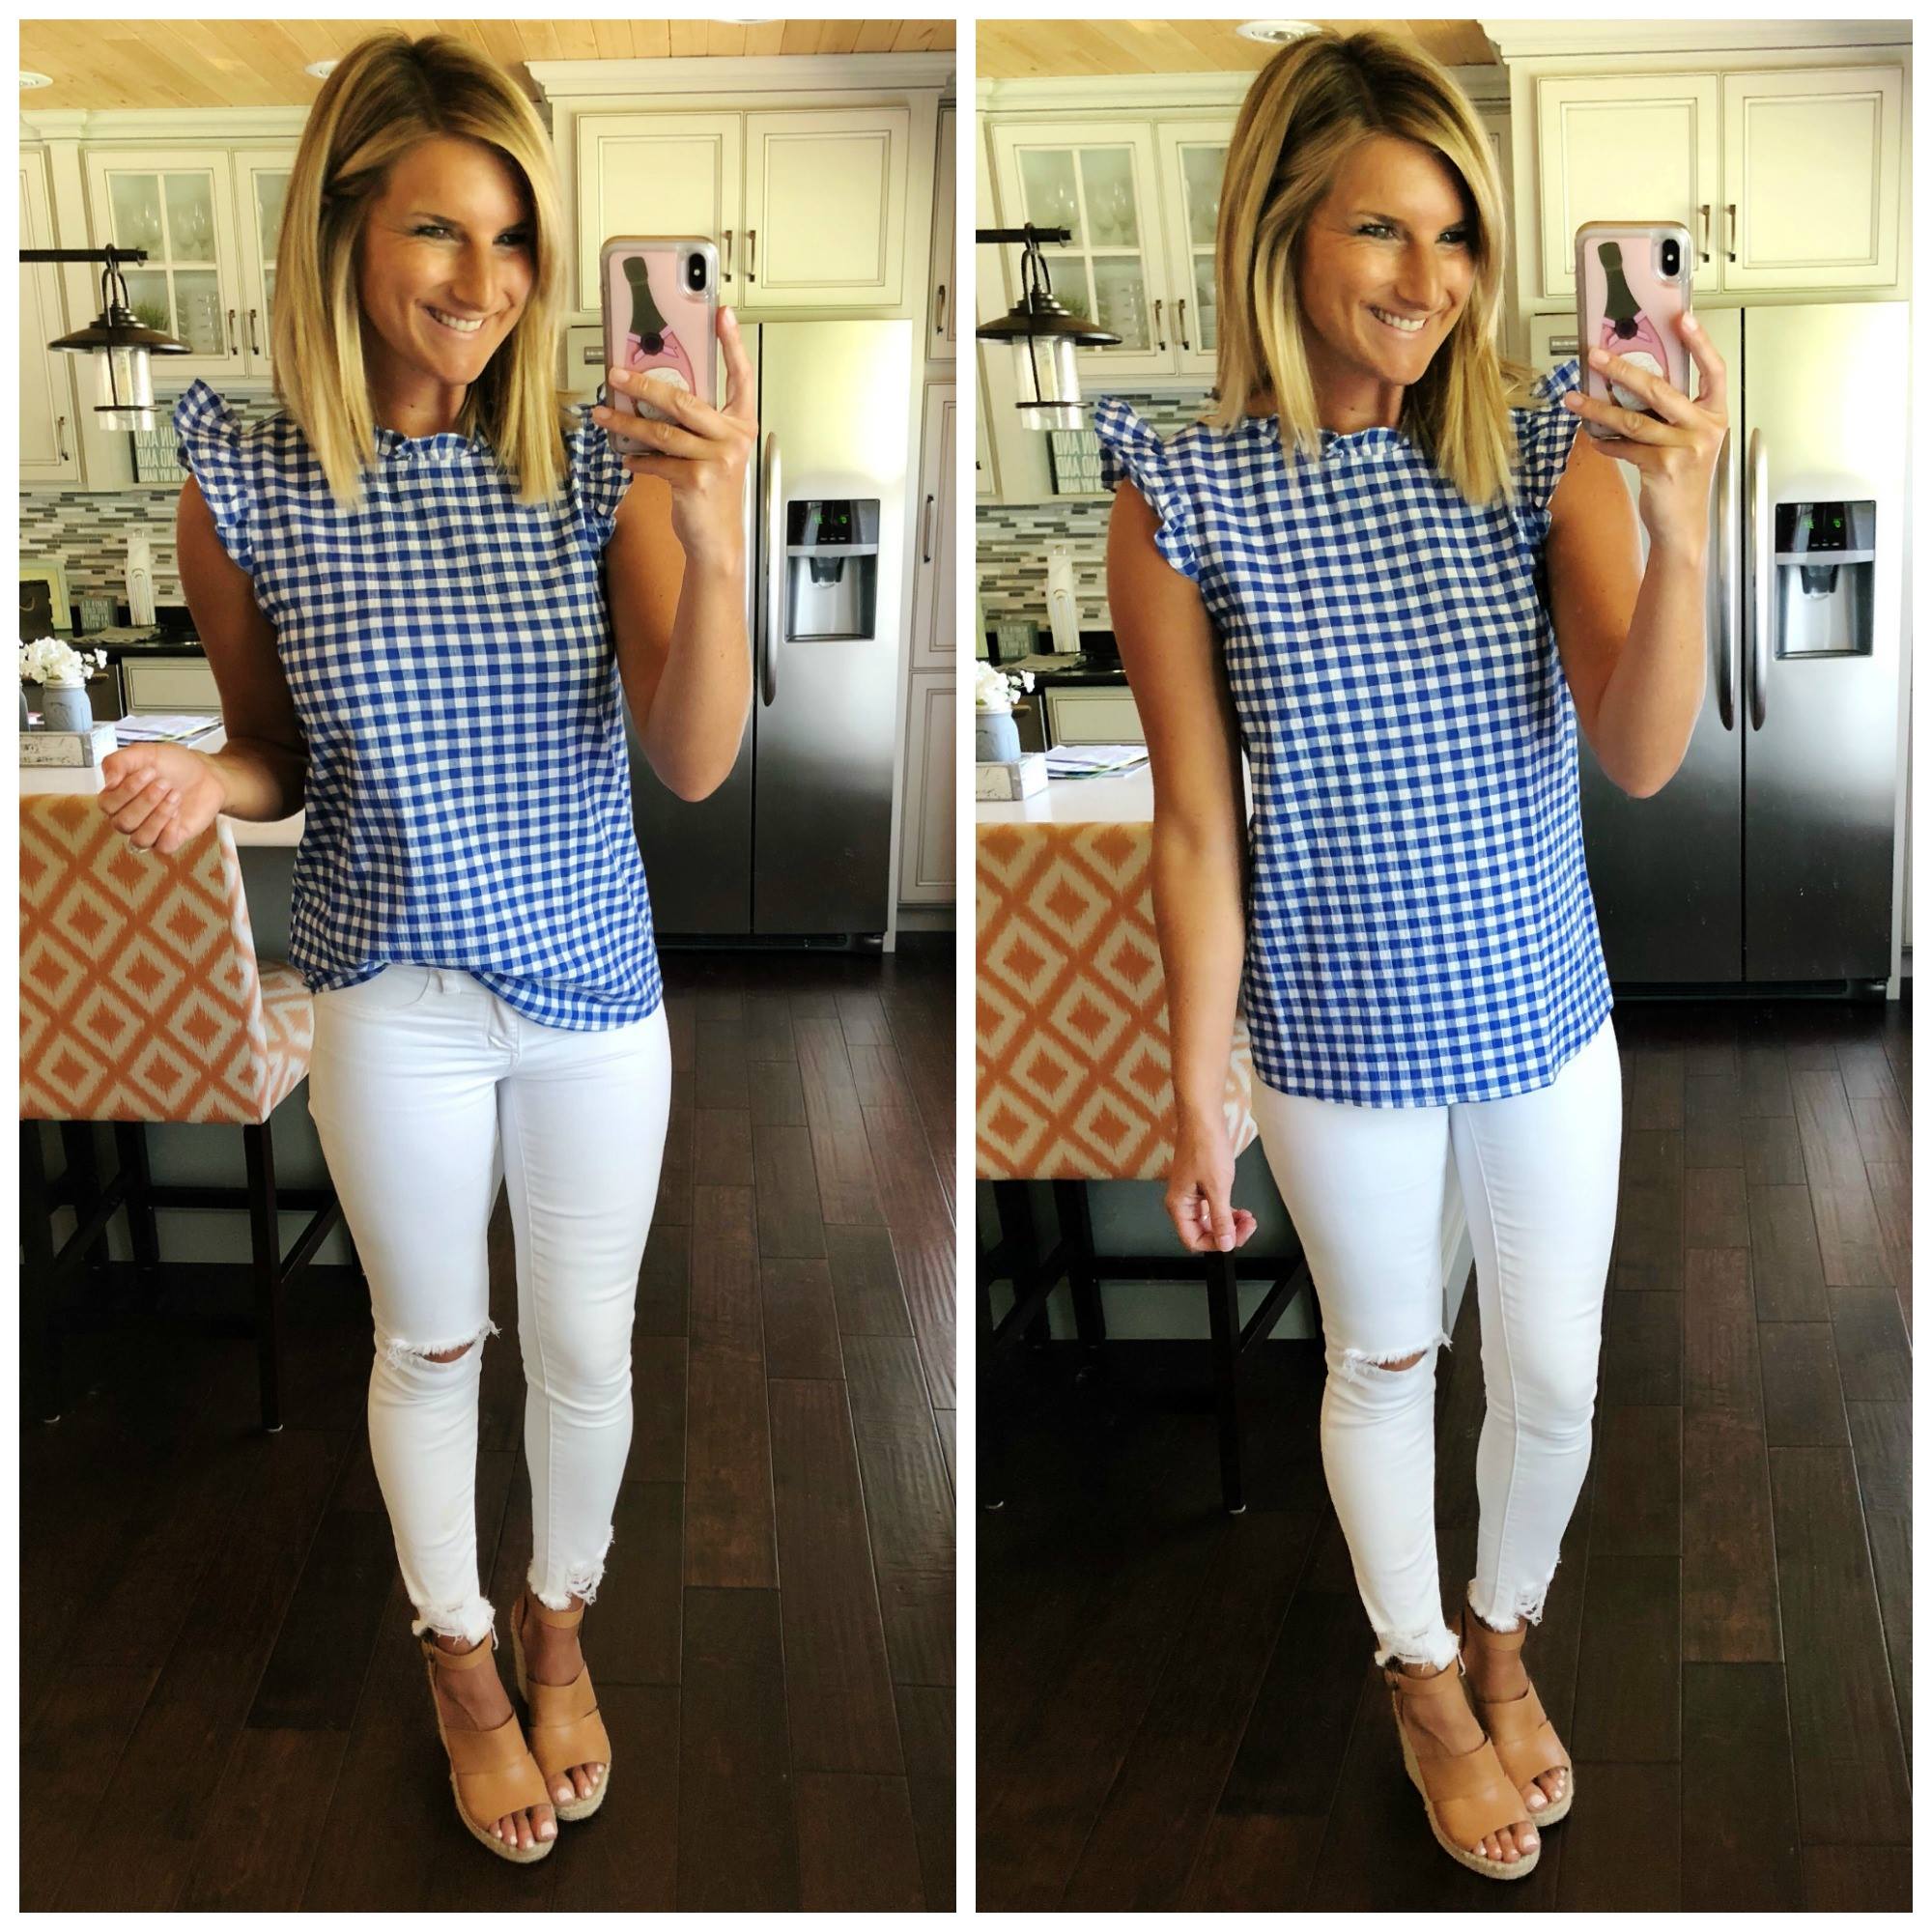 How to Style a Gingham Top // What to wear with white jeans // Summer Outfit Inspiration // Outfit of the Day